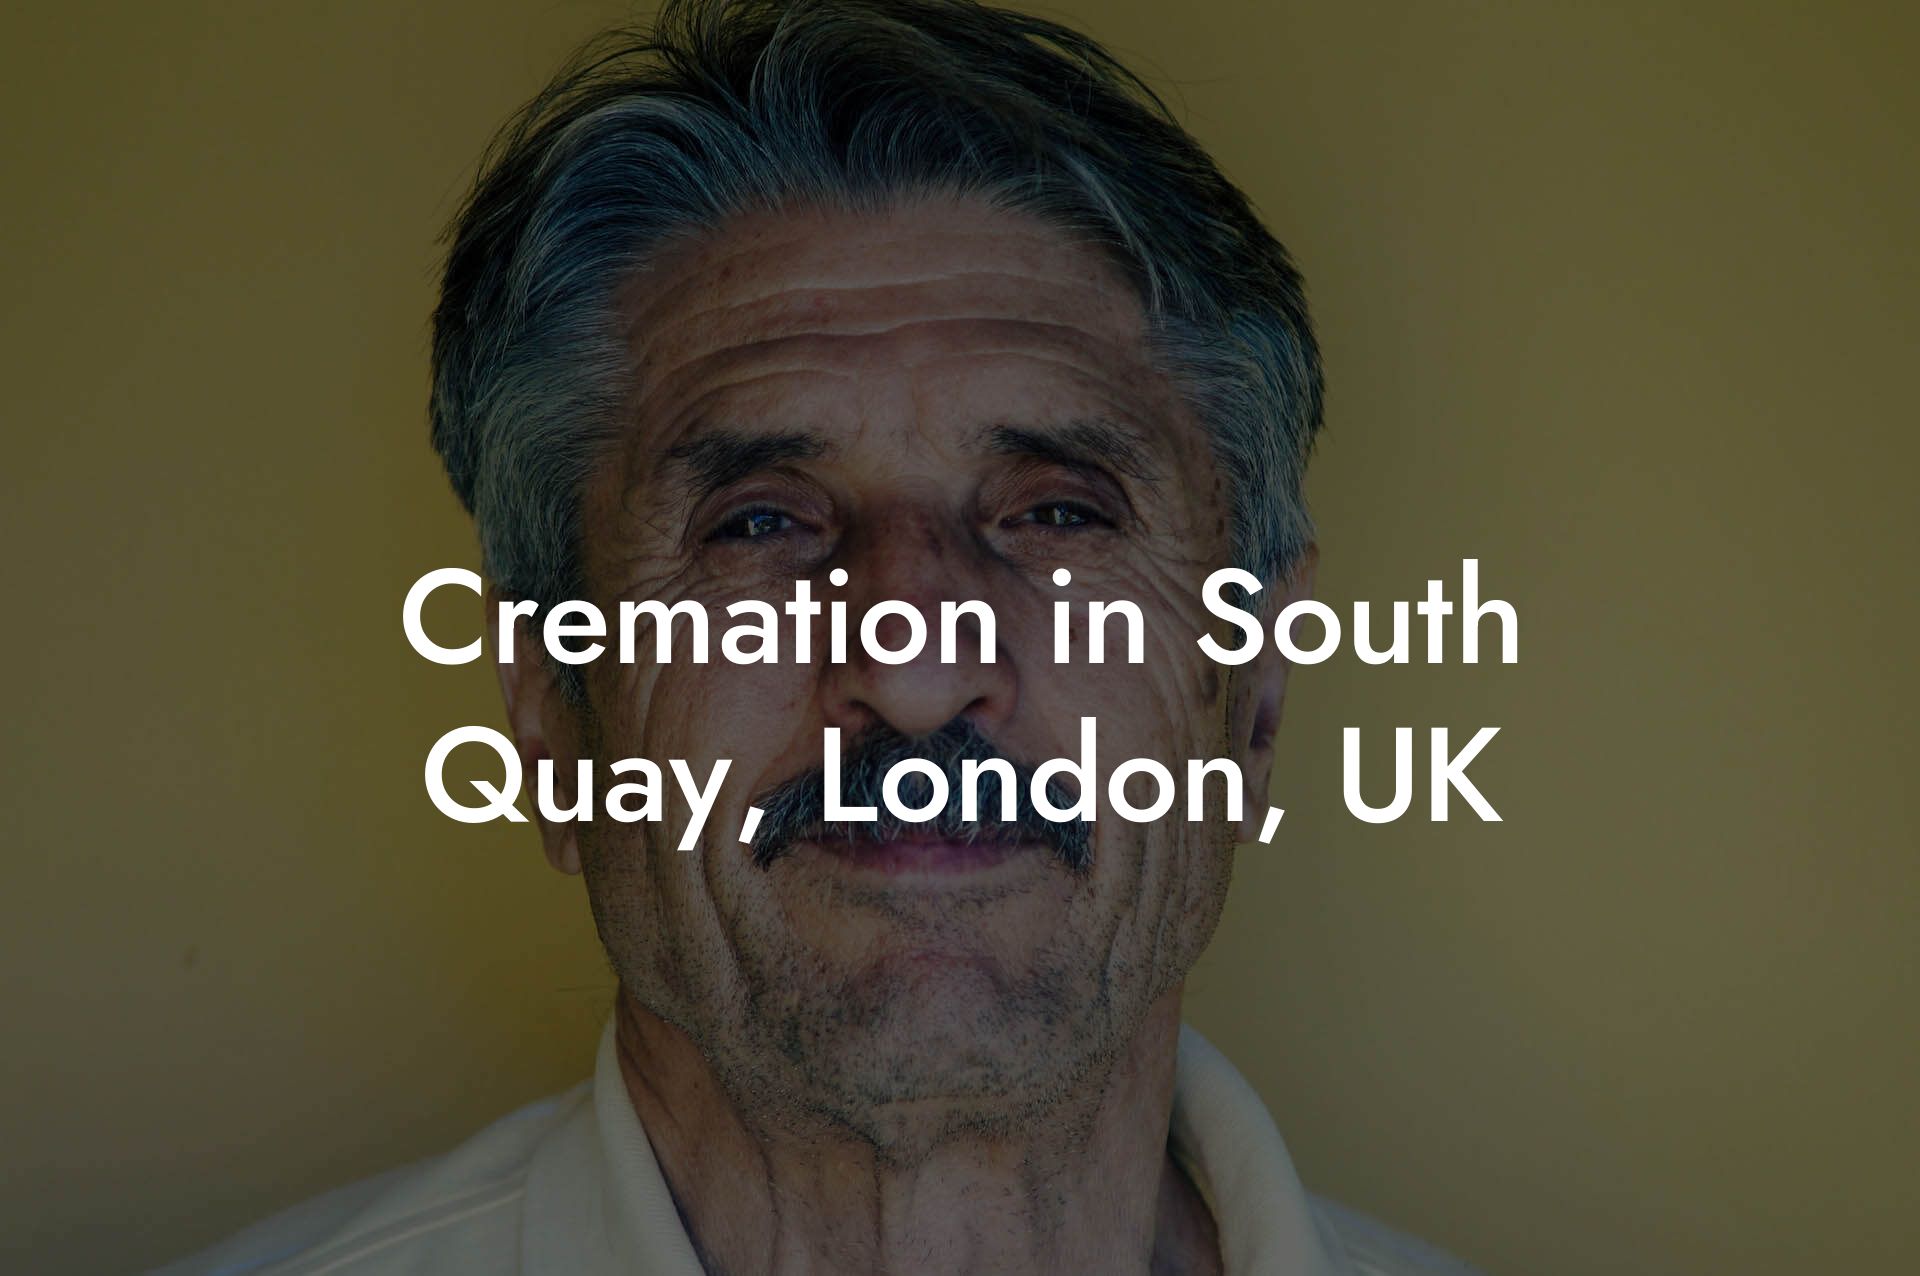 Cremation in South Quay, London, UK